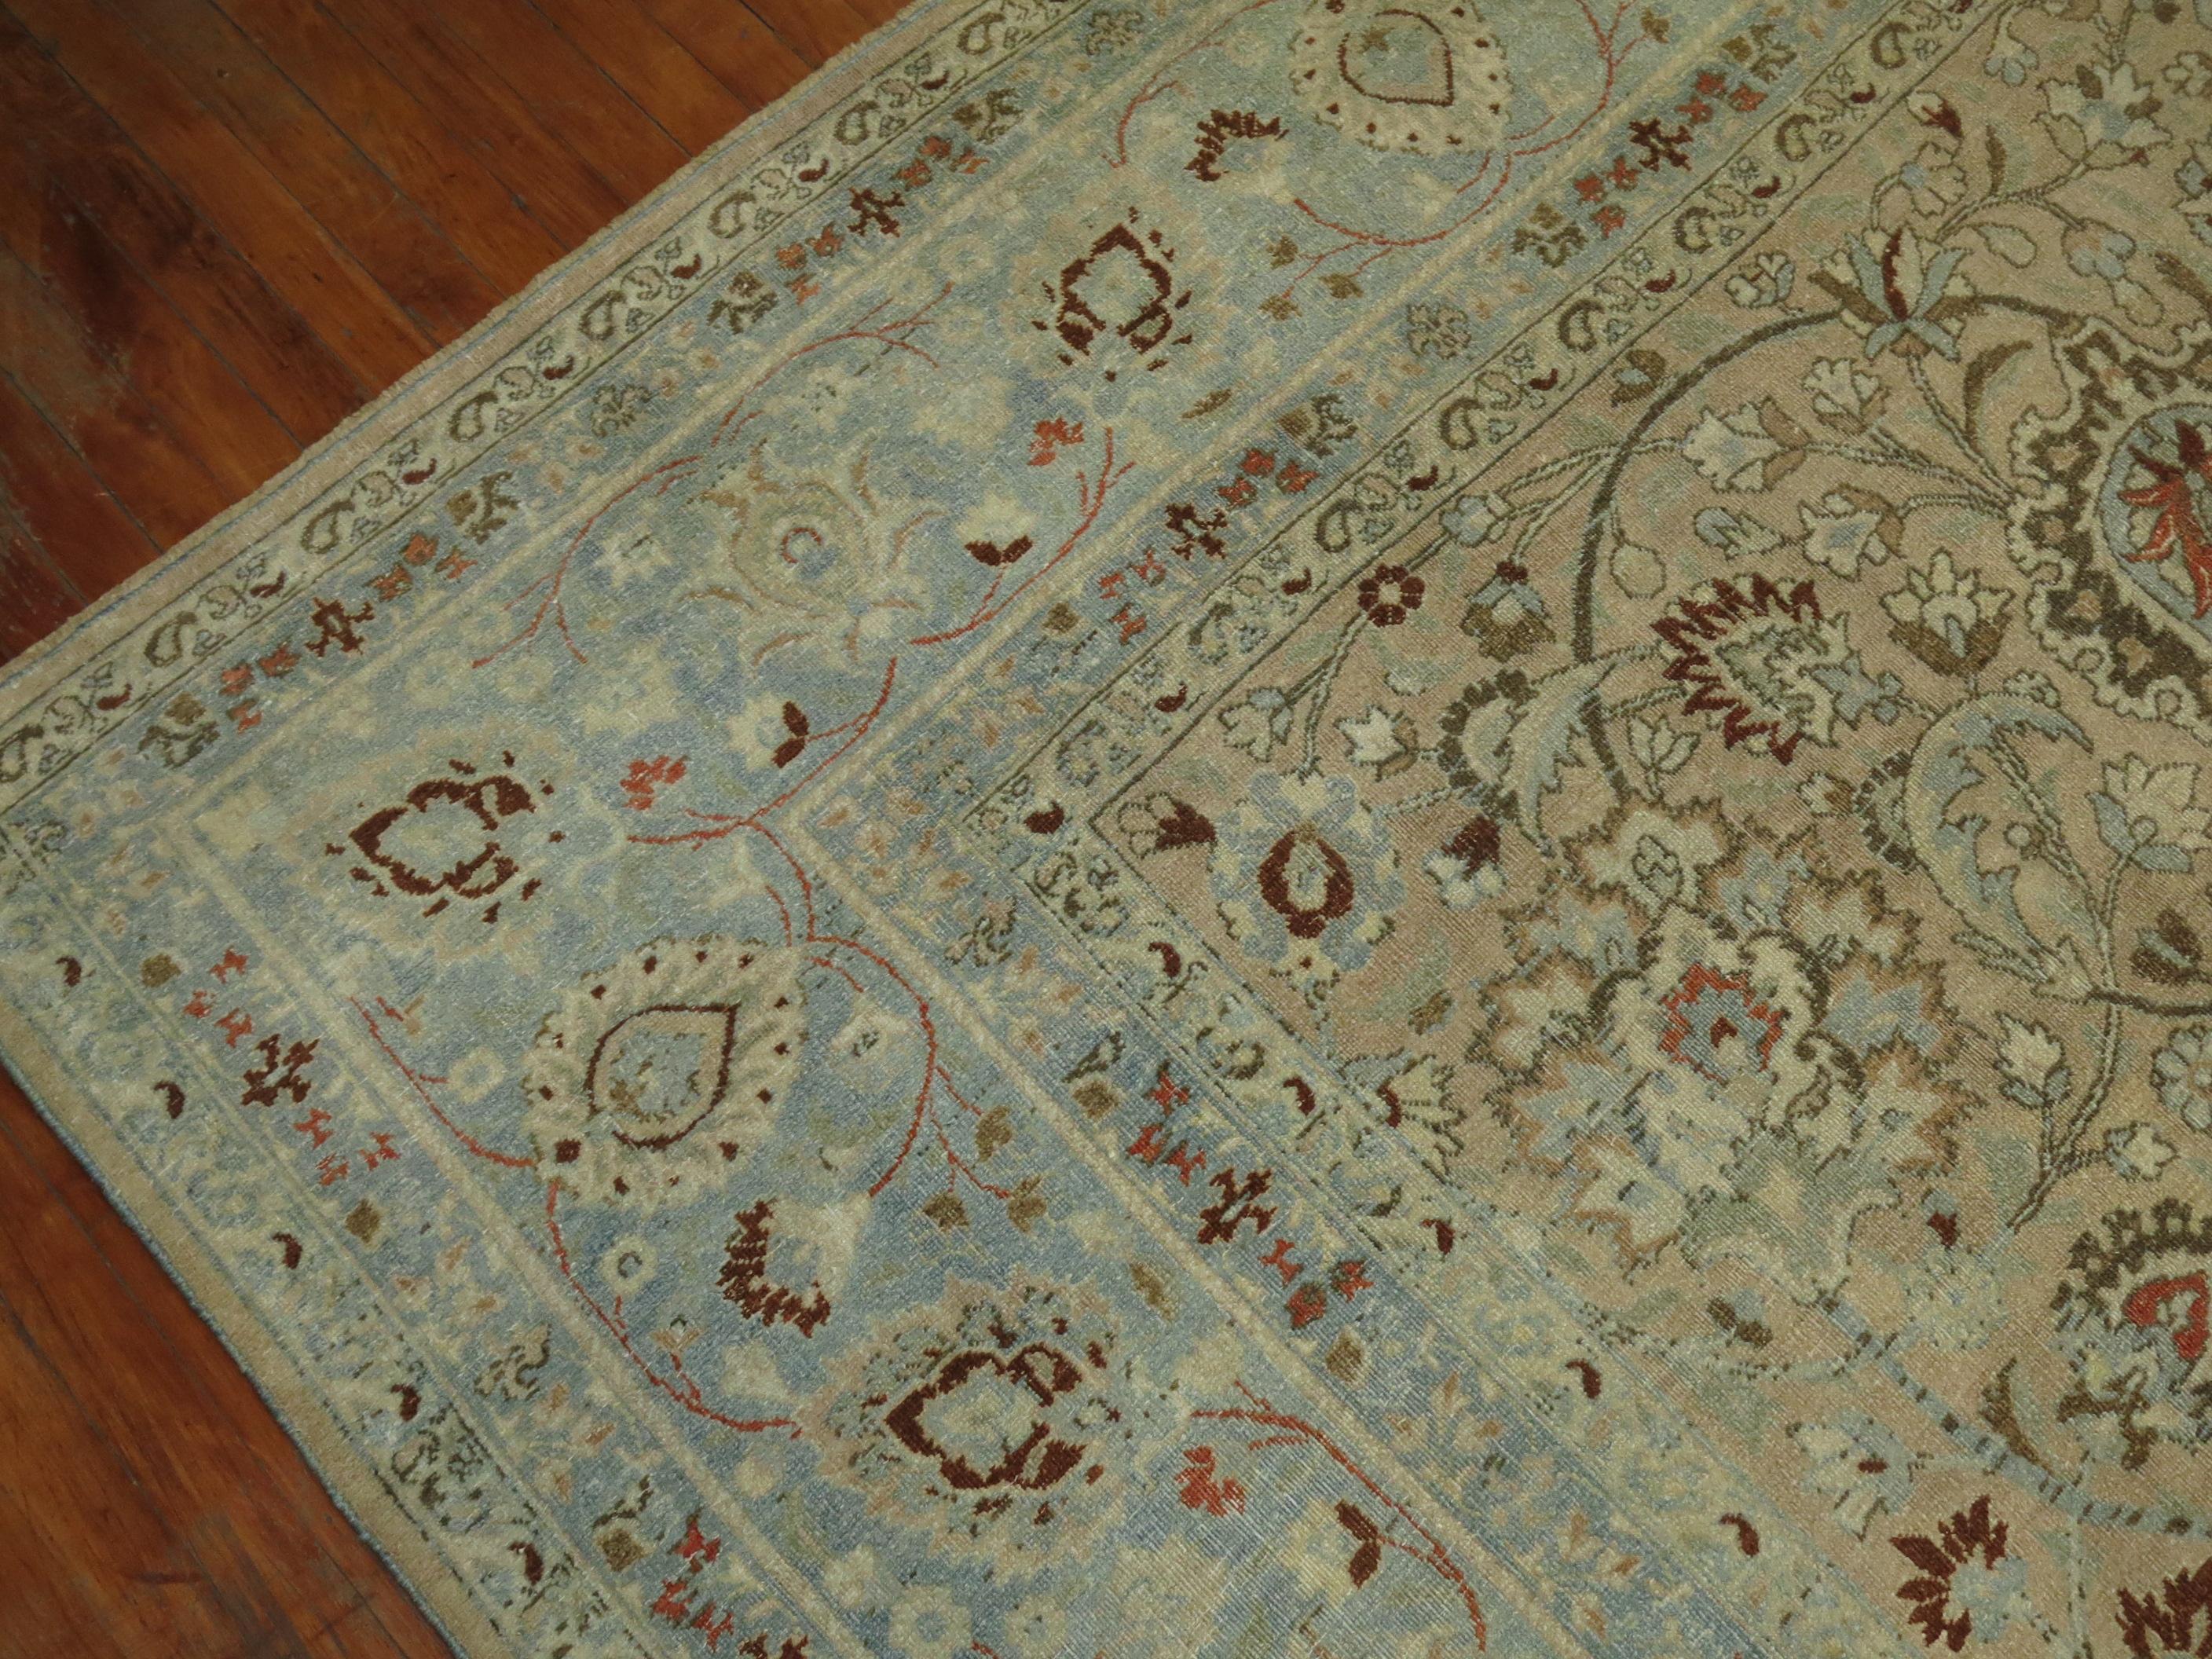 Stunning Tan Icy Blue Antique Persian Formal Meshed Rug, 20th Century For Sale 2